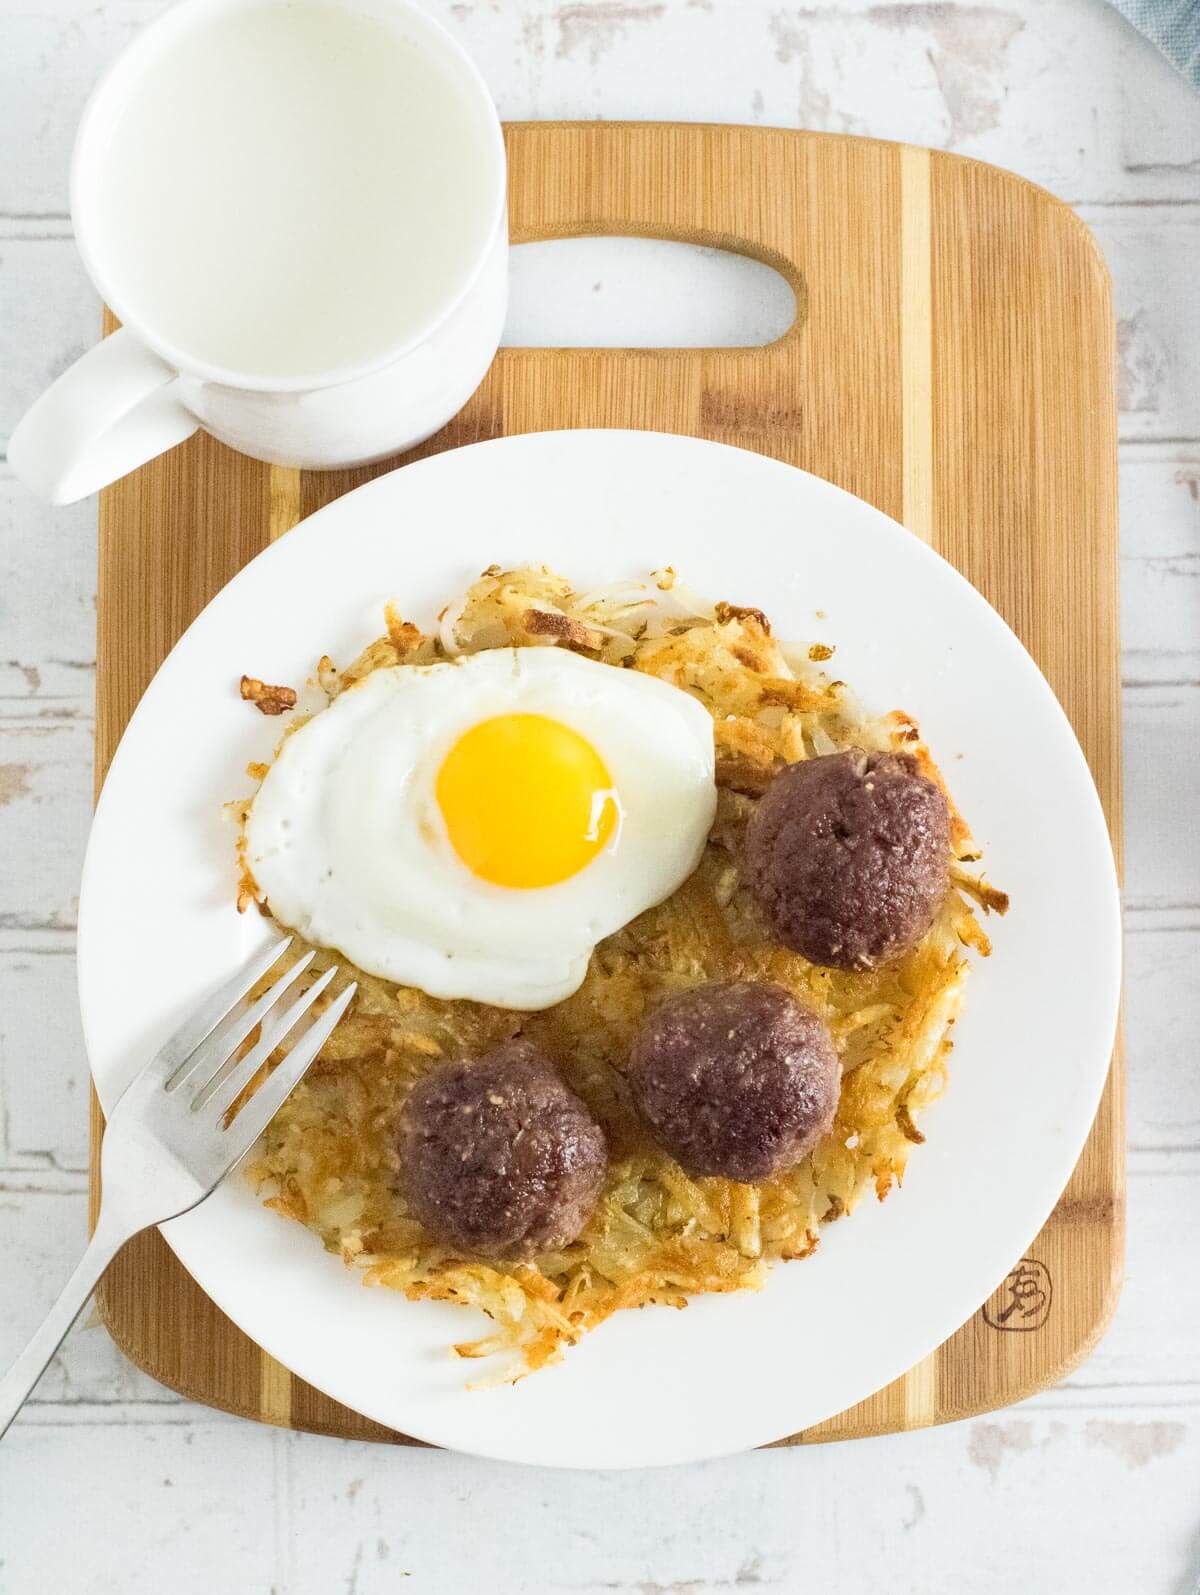 Breakfast meatballs served with egg and hashbrowns.